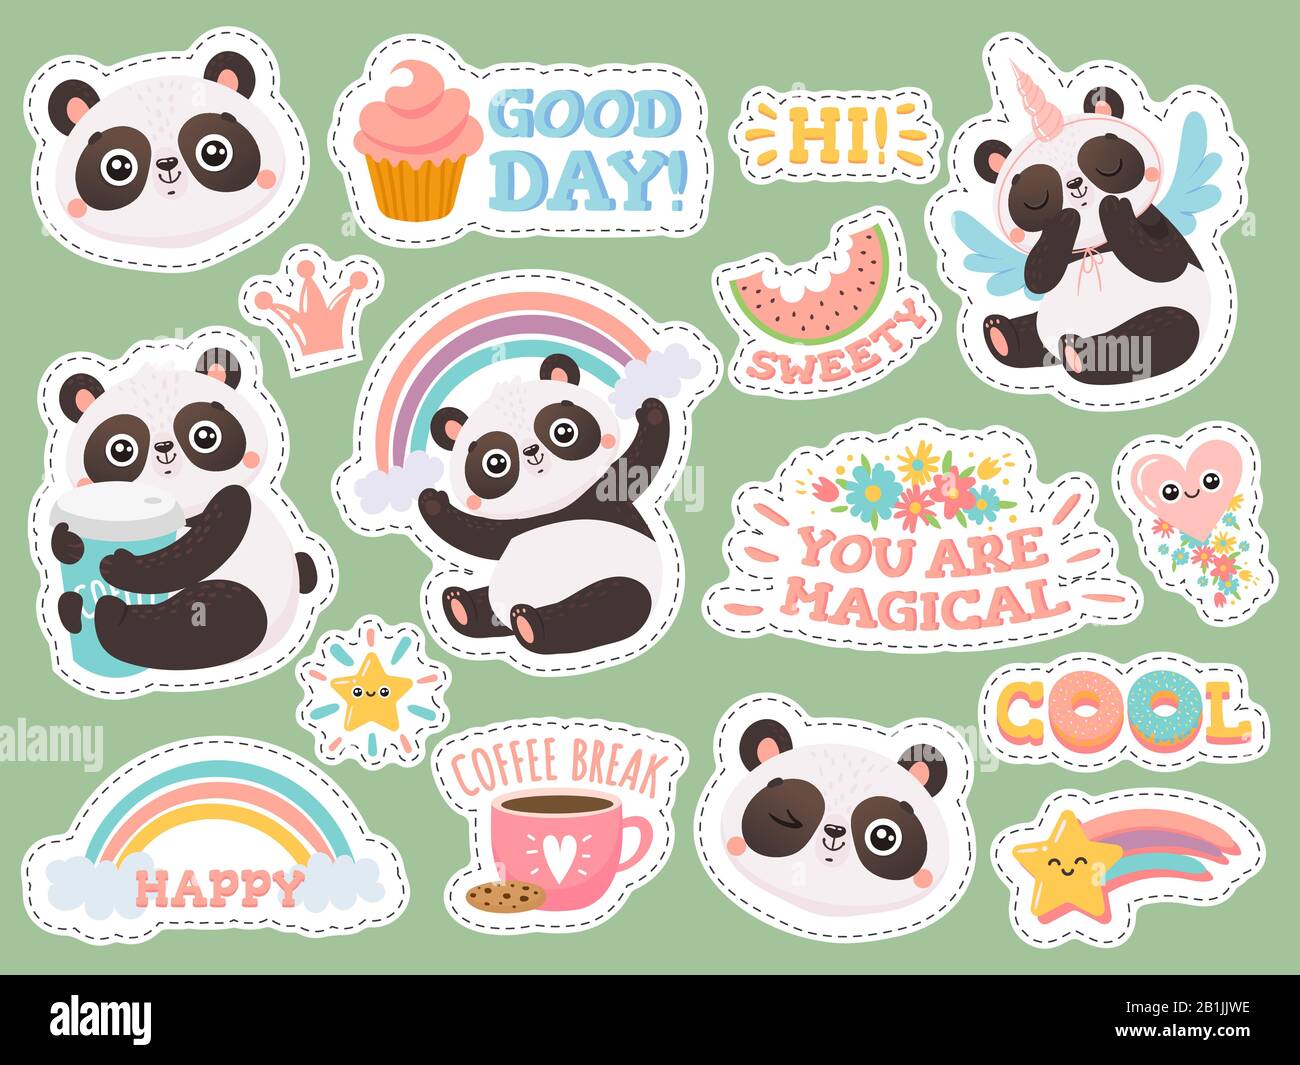 Cute panda stickers. Happy pandas patches, cool animals and winked panda sticker vector illustration set Stock Vector